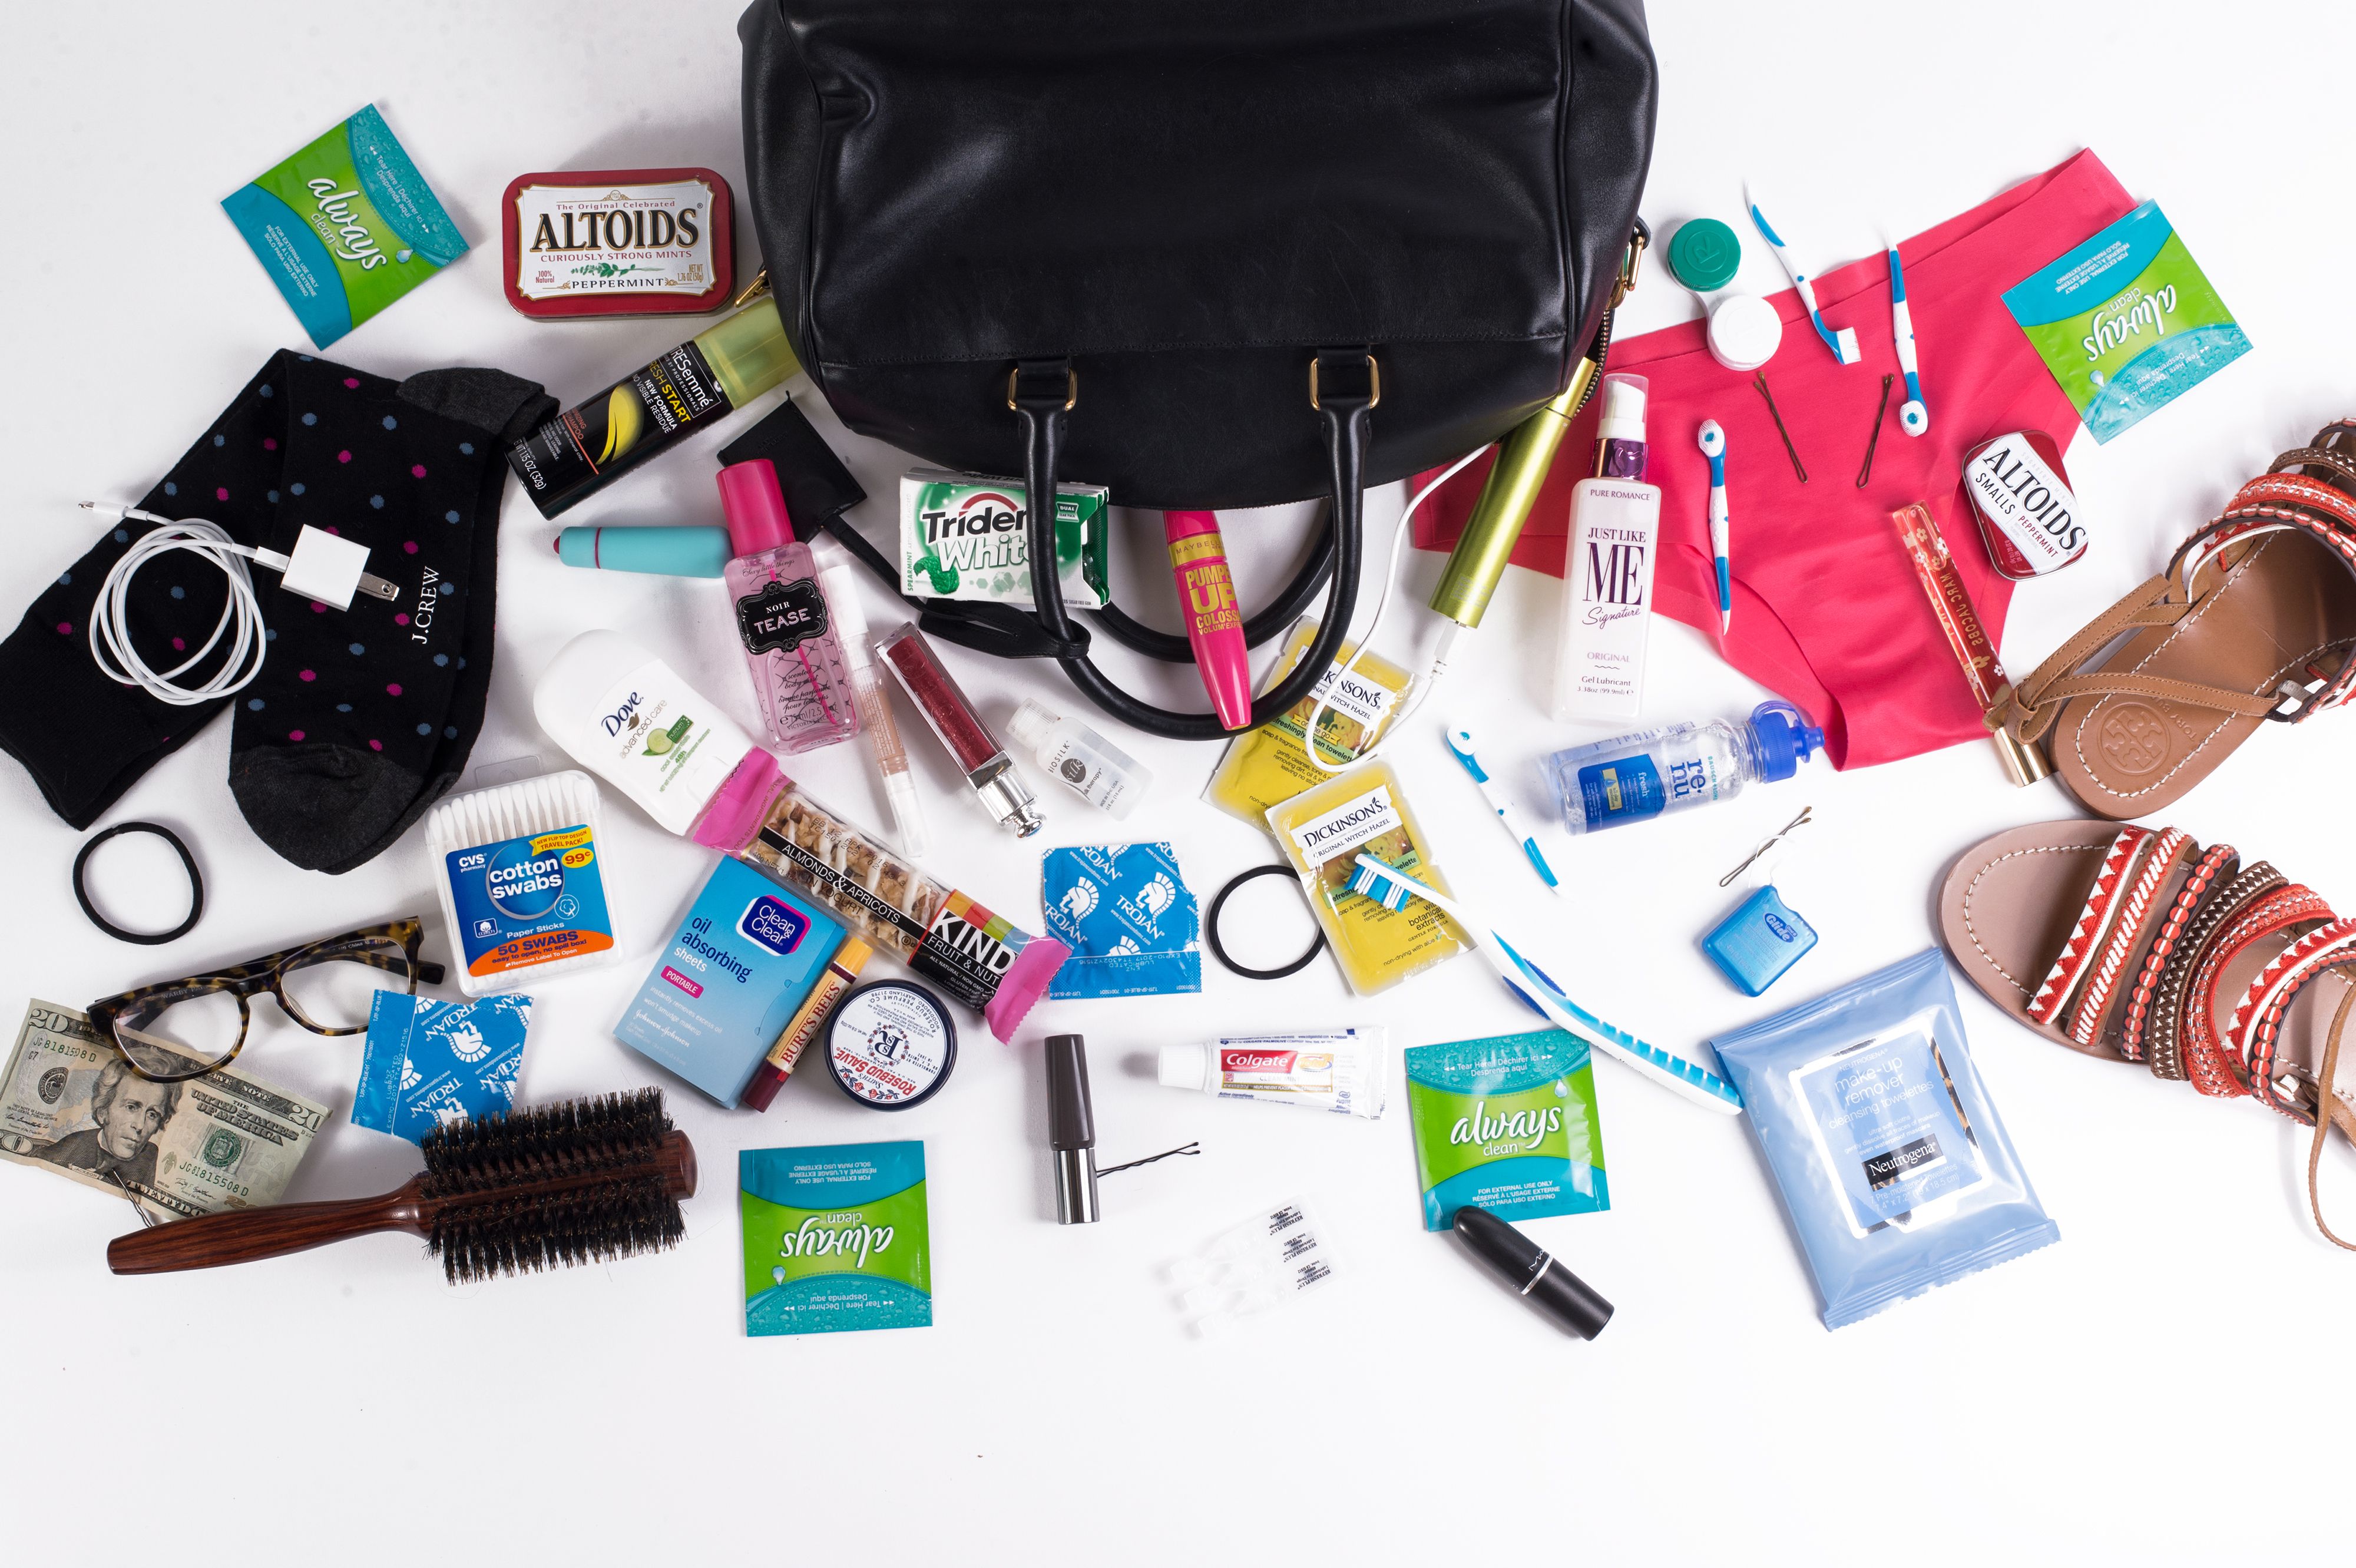 What's In My Purse? The Everyday Essentials Inside My Bag